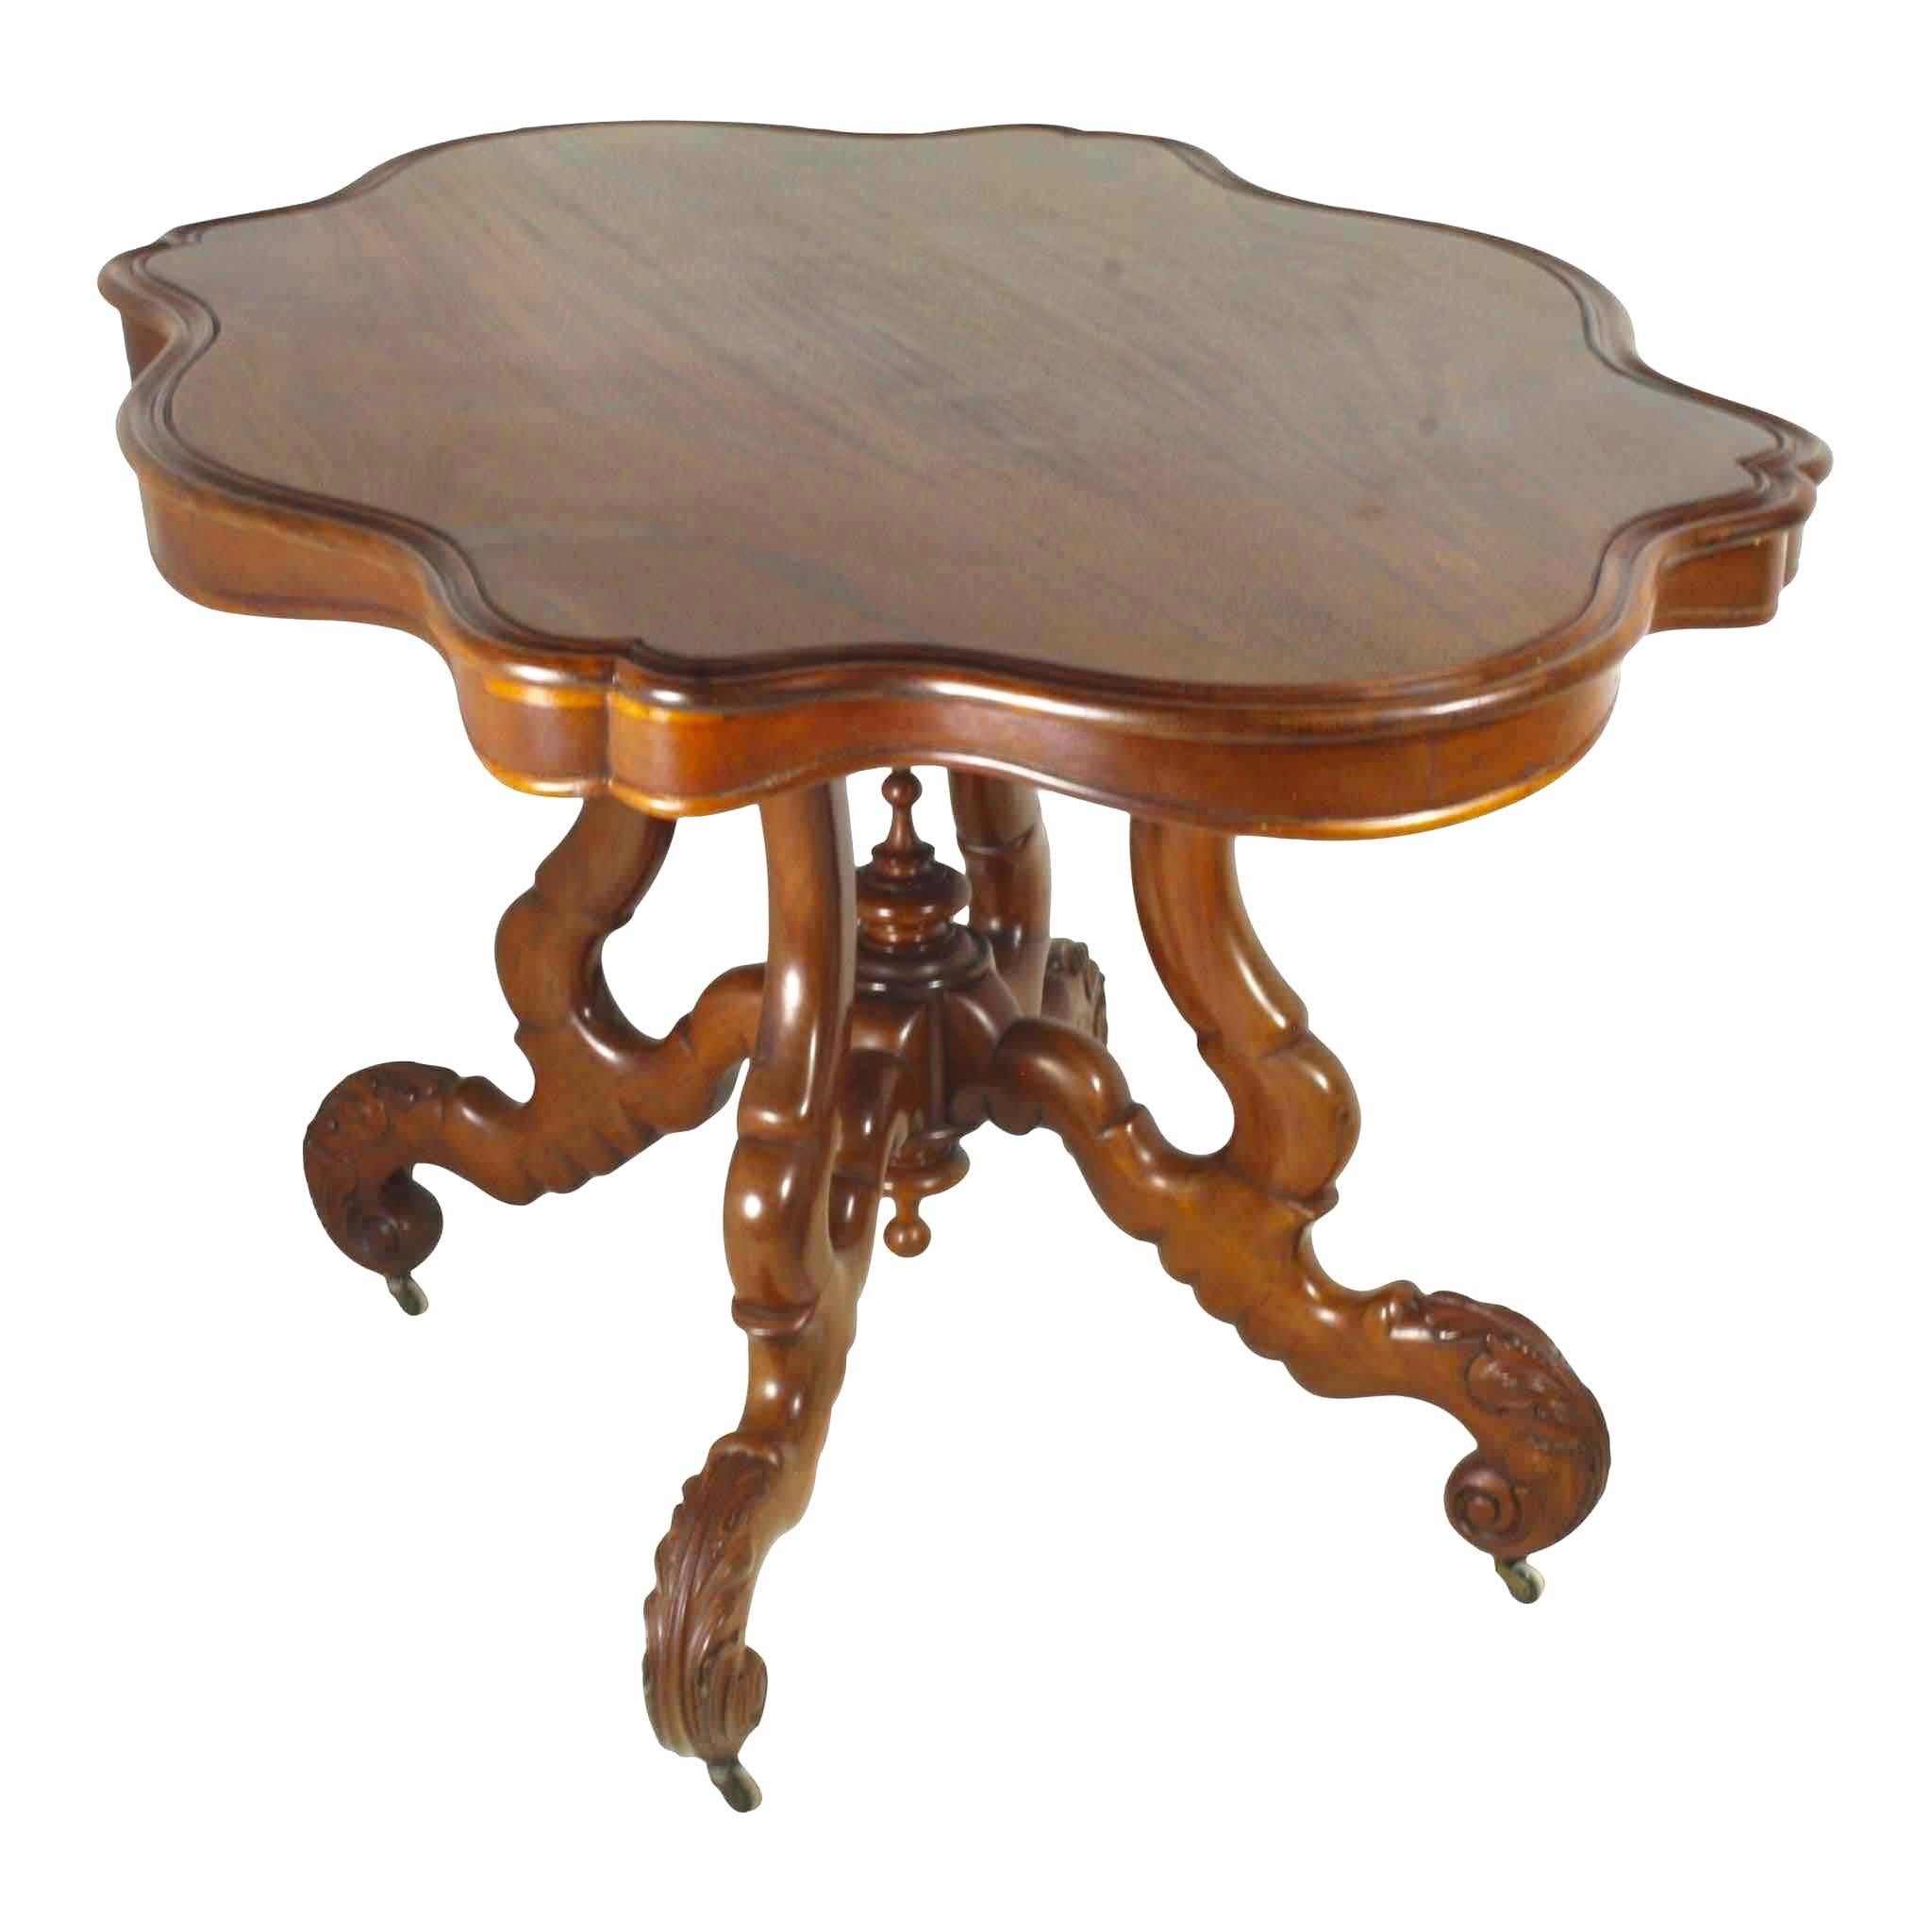 Early 20th Century Dutch Mahogany Occasional Table